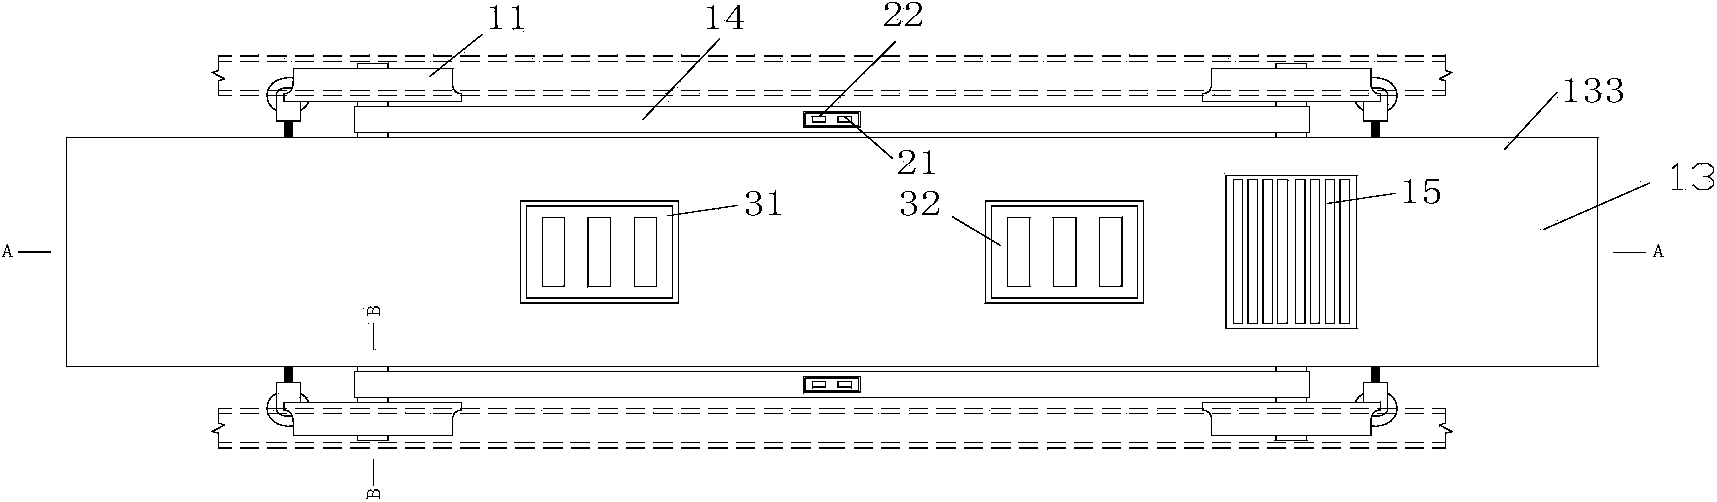 Automatic track settlement measuring device and method based on angle measurement